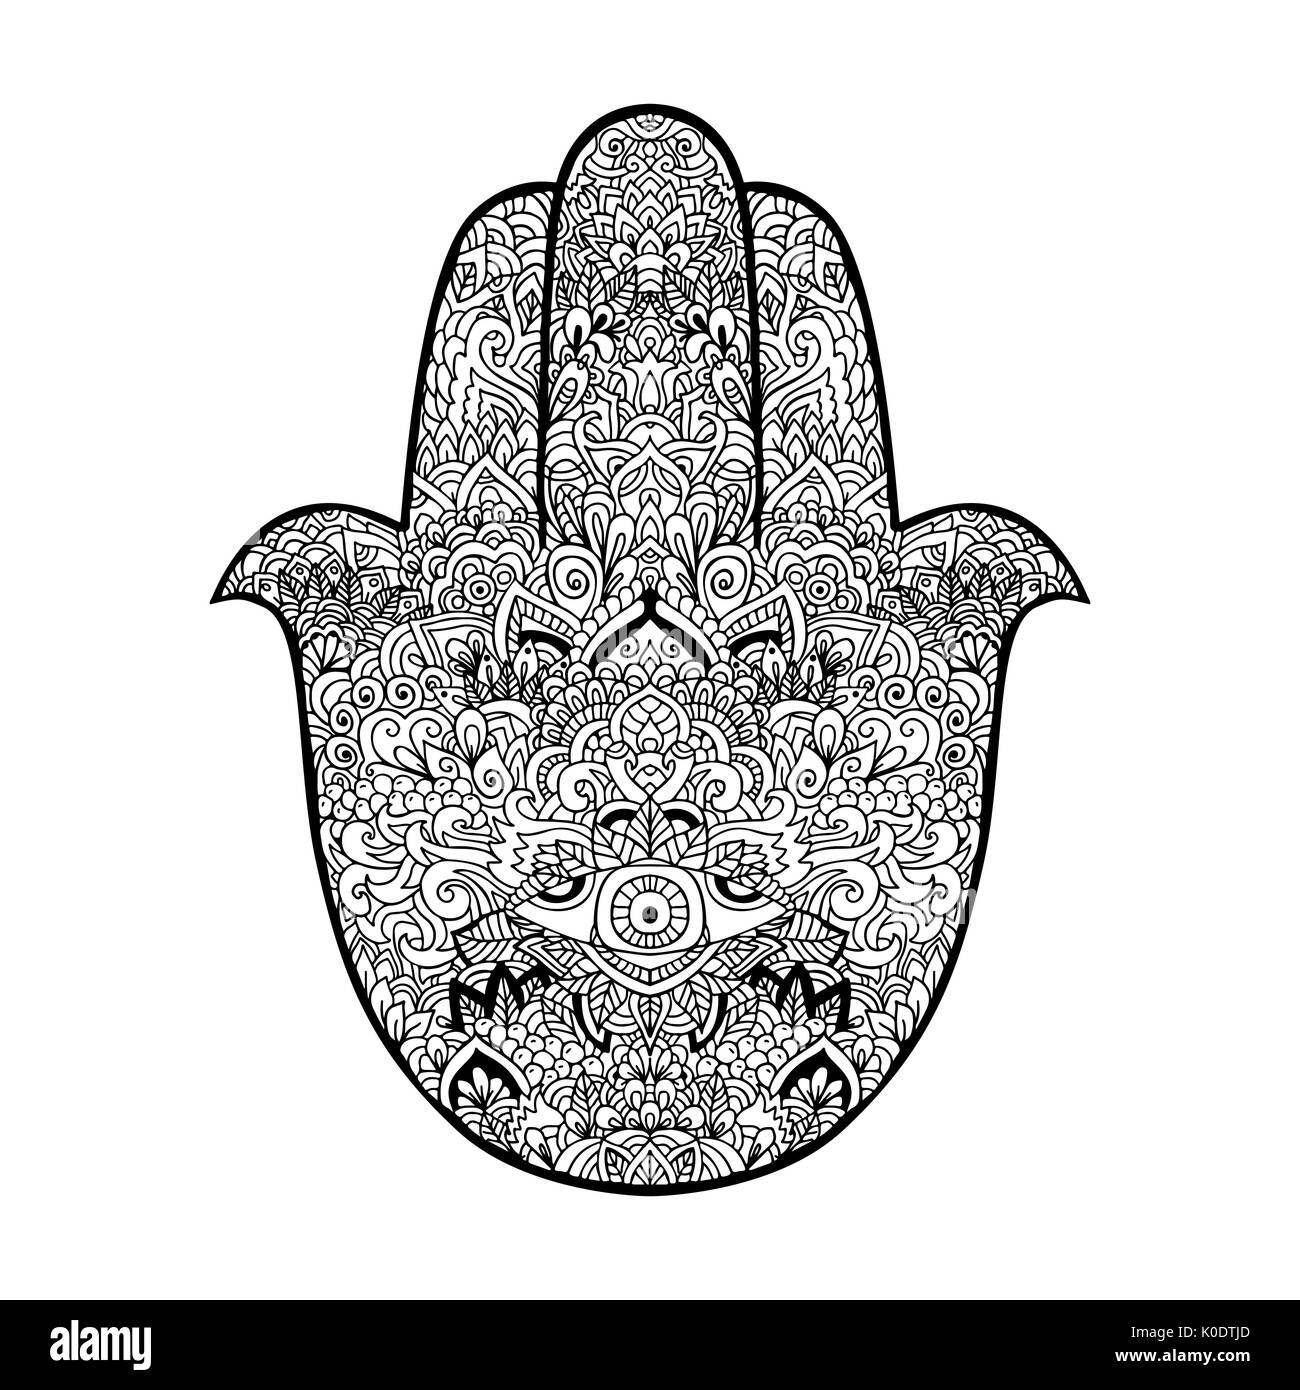 Hamsa hand drawn symbol. Fatima hand pattern. Vector illustration. Indian mandala ornament for adult coloring books. Asian pattern. Black and white authentic background. Stock Vector